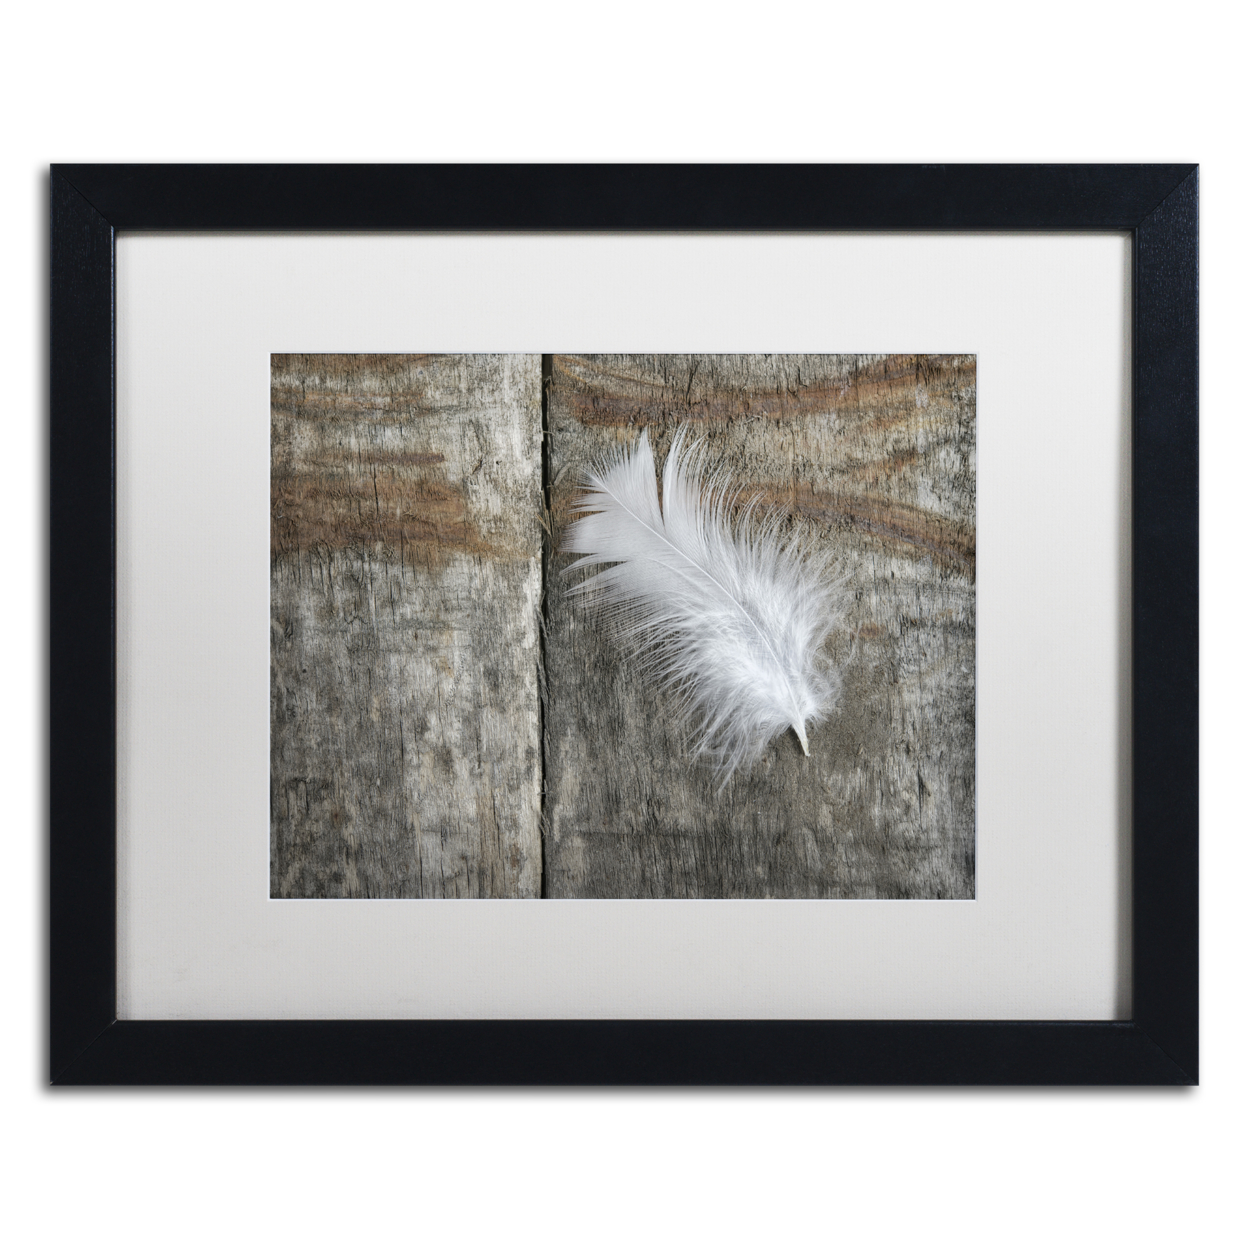 Cora Niele 'Feather On Wood II' Black Wooden Framed Art 18 X 22 Inches